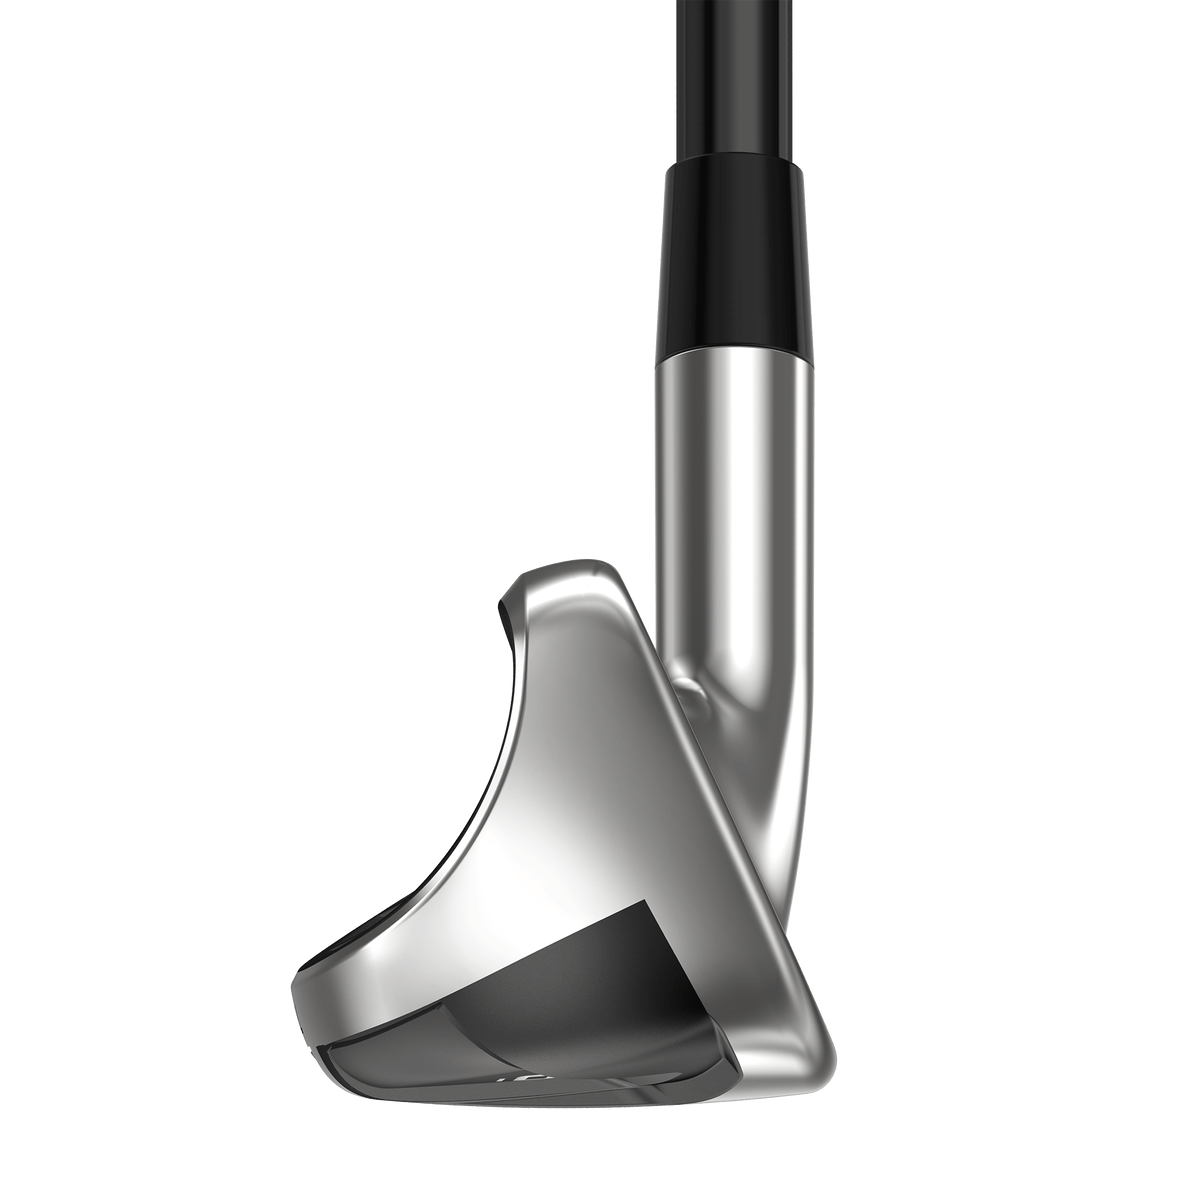 Cleveland Launcher HB Turbo Irons · Right handed · Graphite · Senior · 5-PW,DW